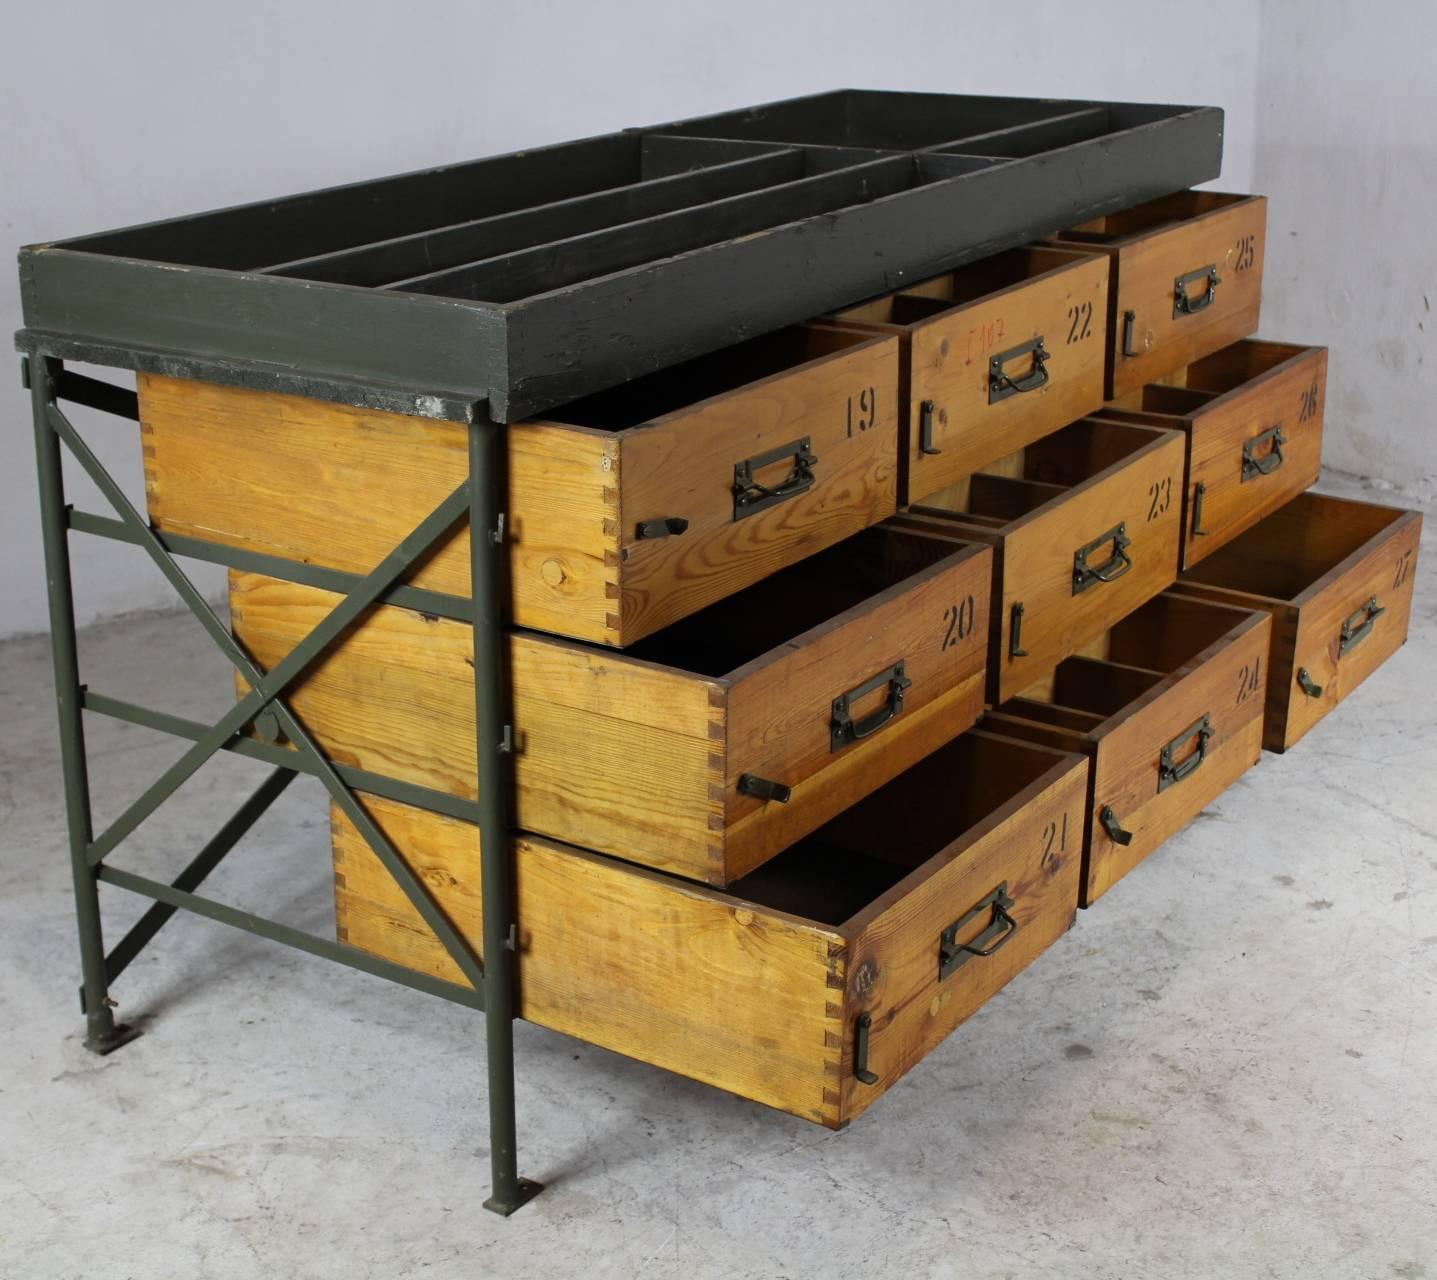 Original primitive industrial chest of drawers from the 1950s. Originally used by Czechoslovak army as a part of a service truck Praga V3S. Metal frame, nine solid wood drawers.